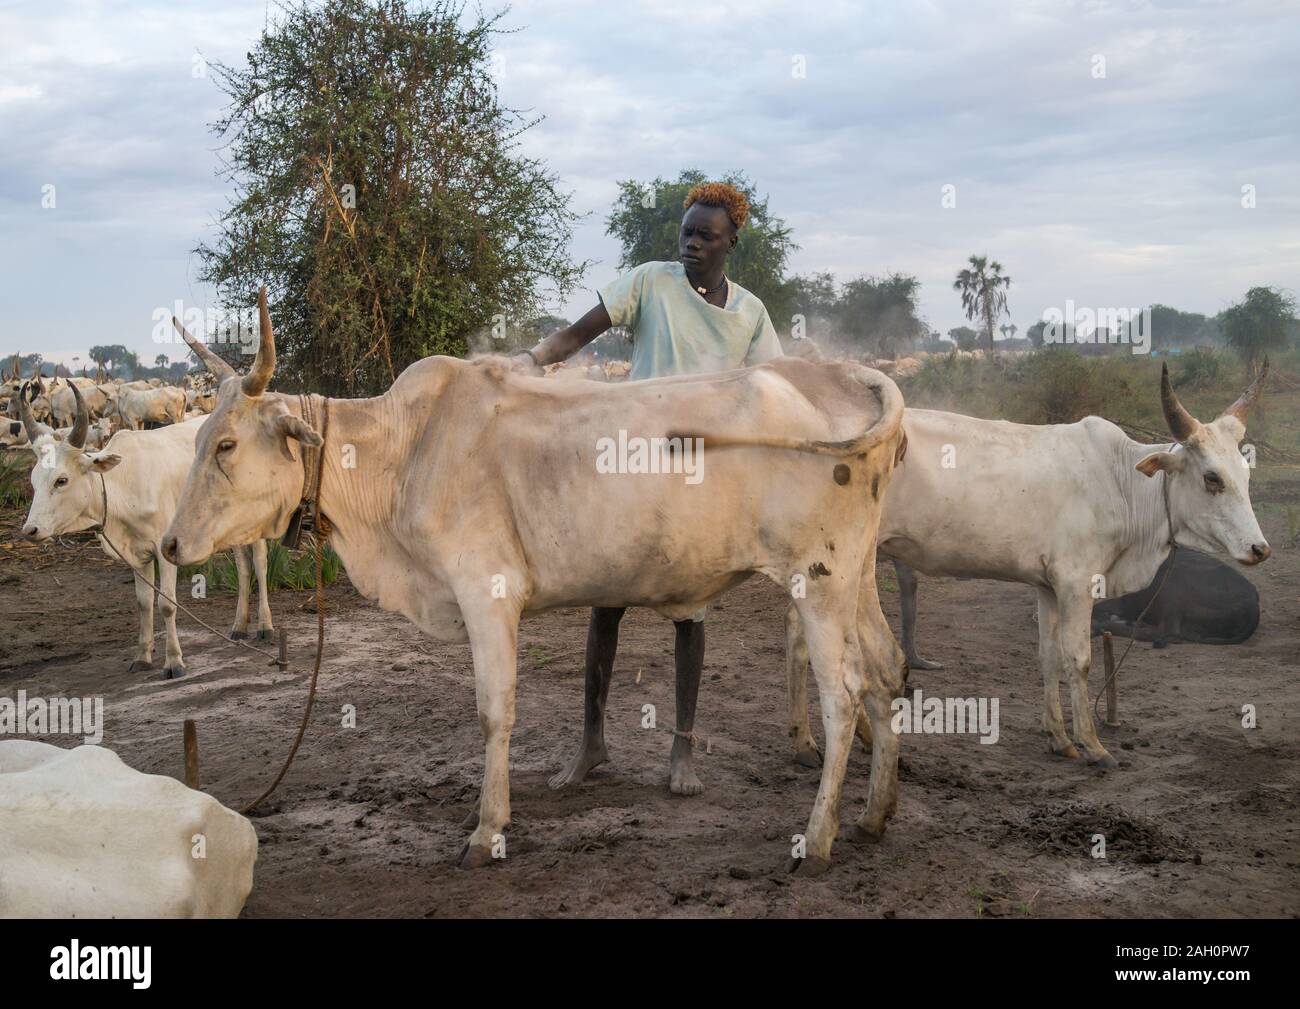 Mundari tribe man covering his cow in ash to repel flies and mosquitoes, Central Equatoria, Terekeka, South Sudan Stock Photo